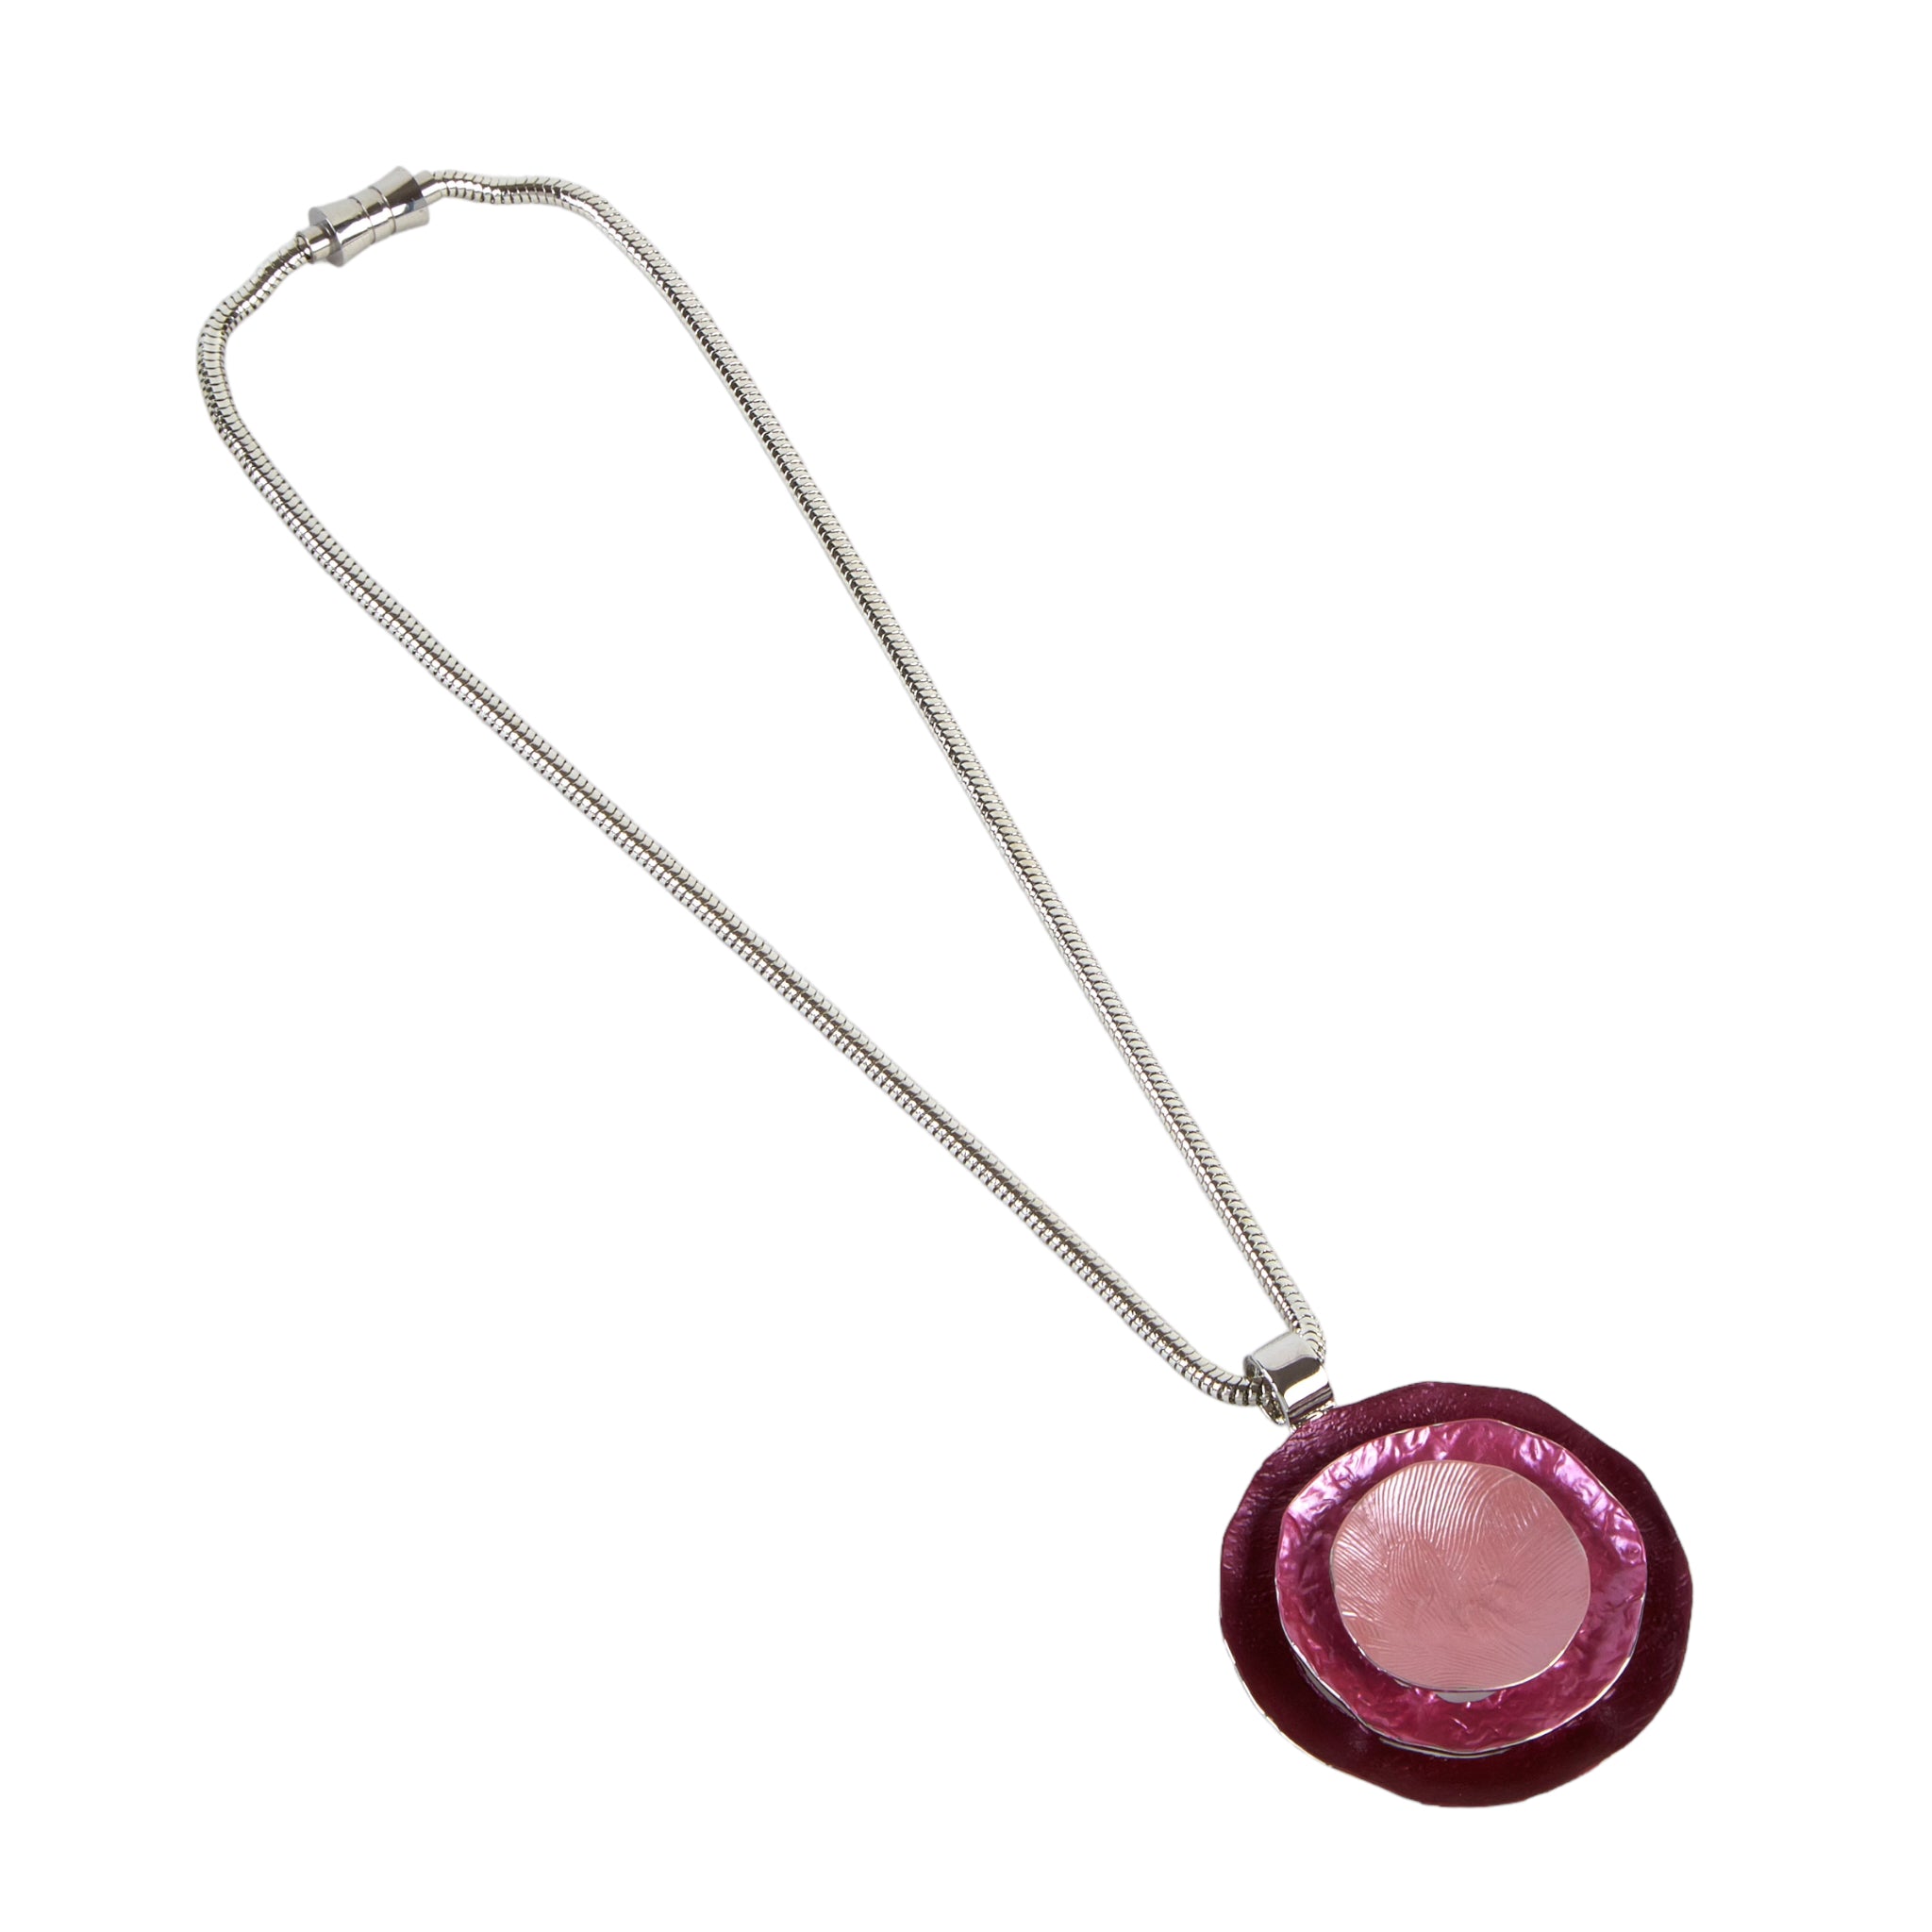 Dante Short Silver Necklace with Pink Pendant